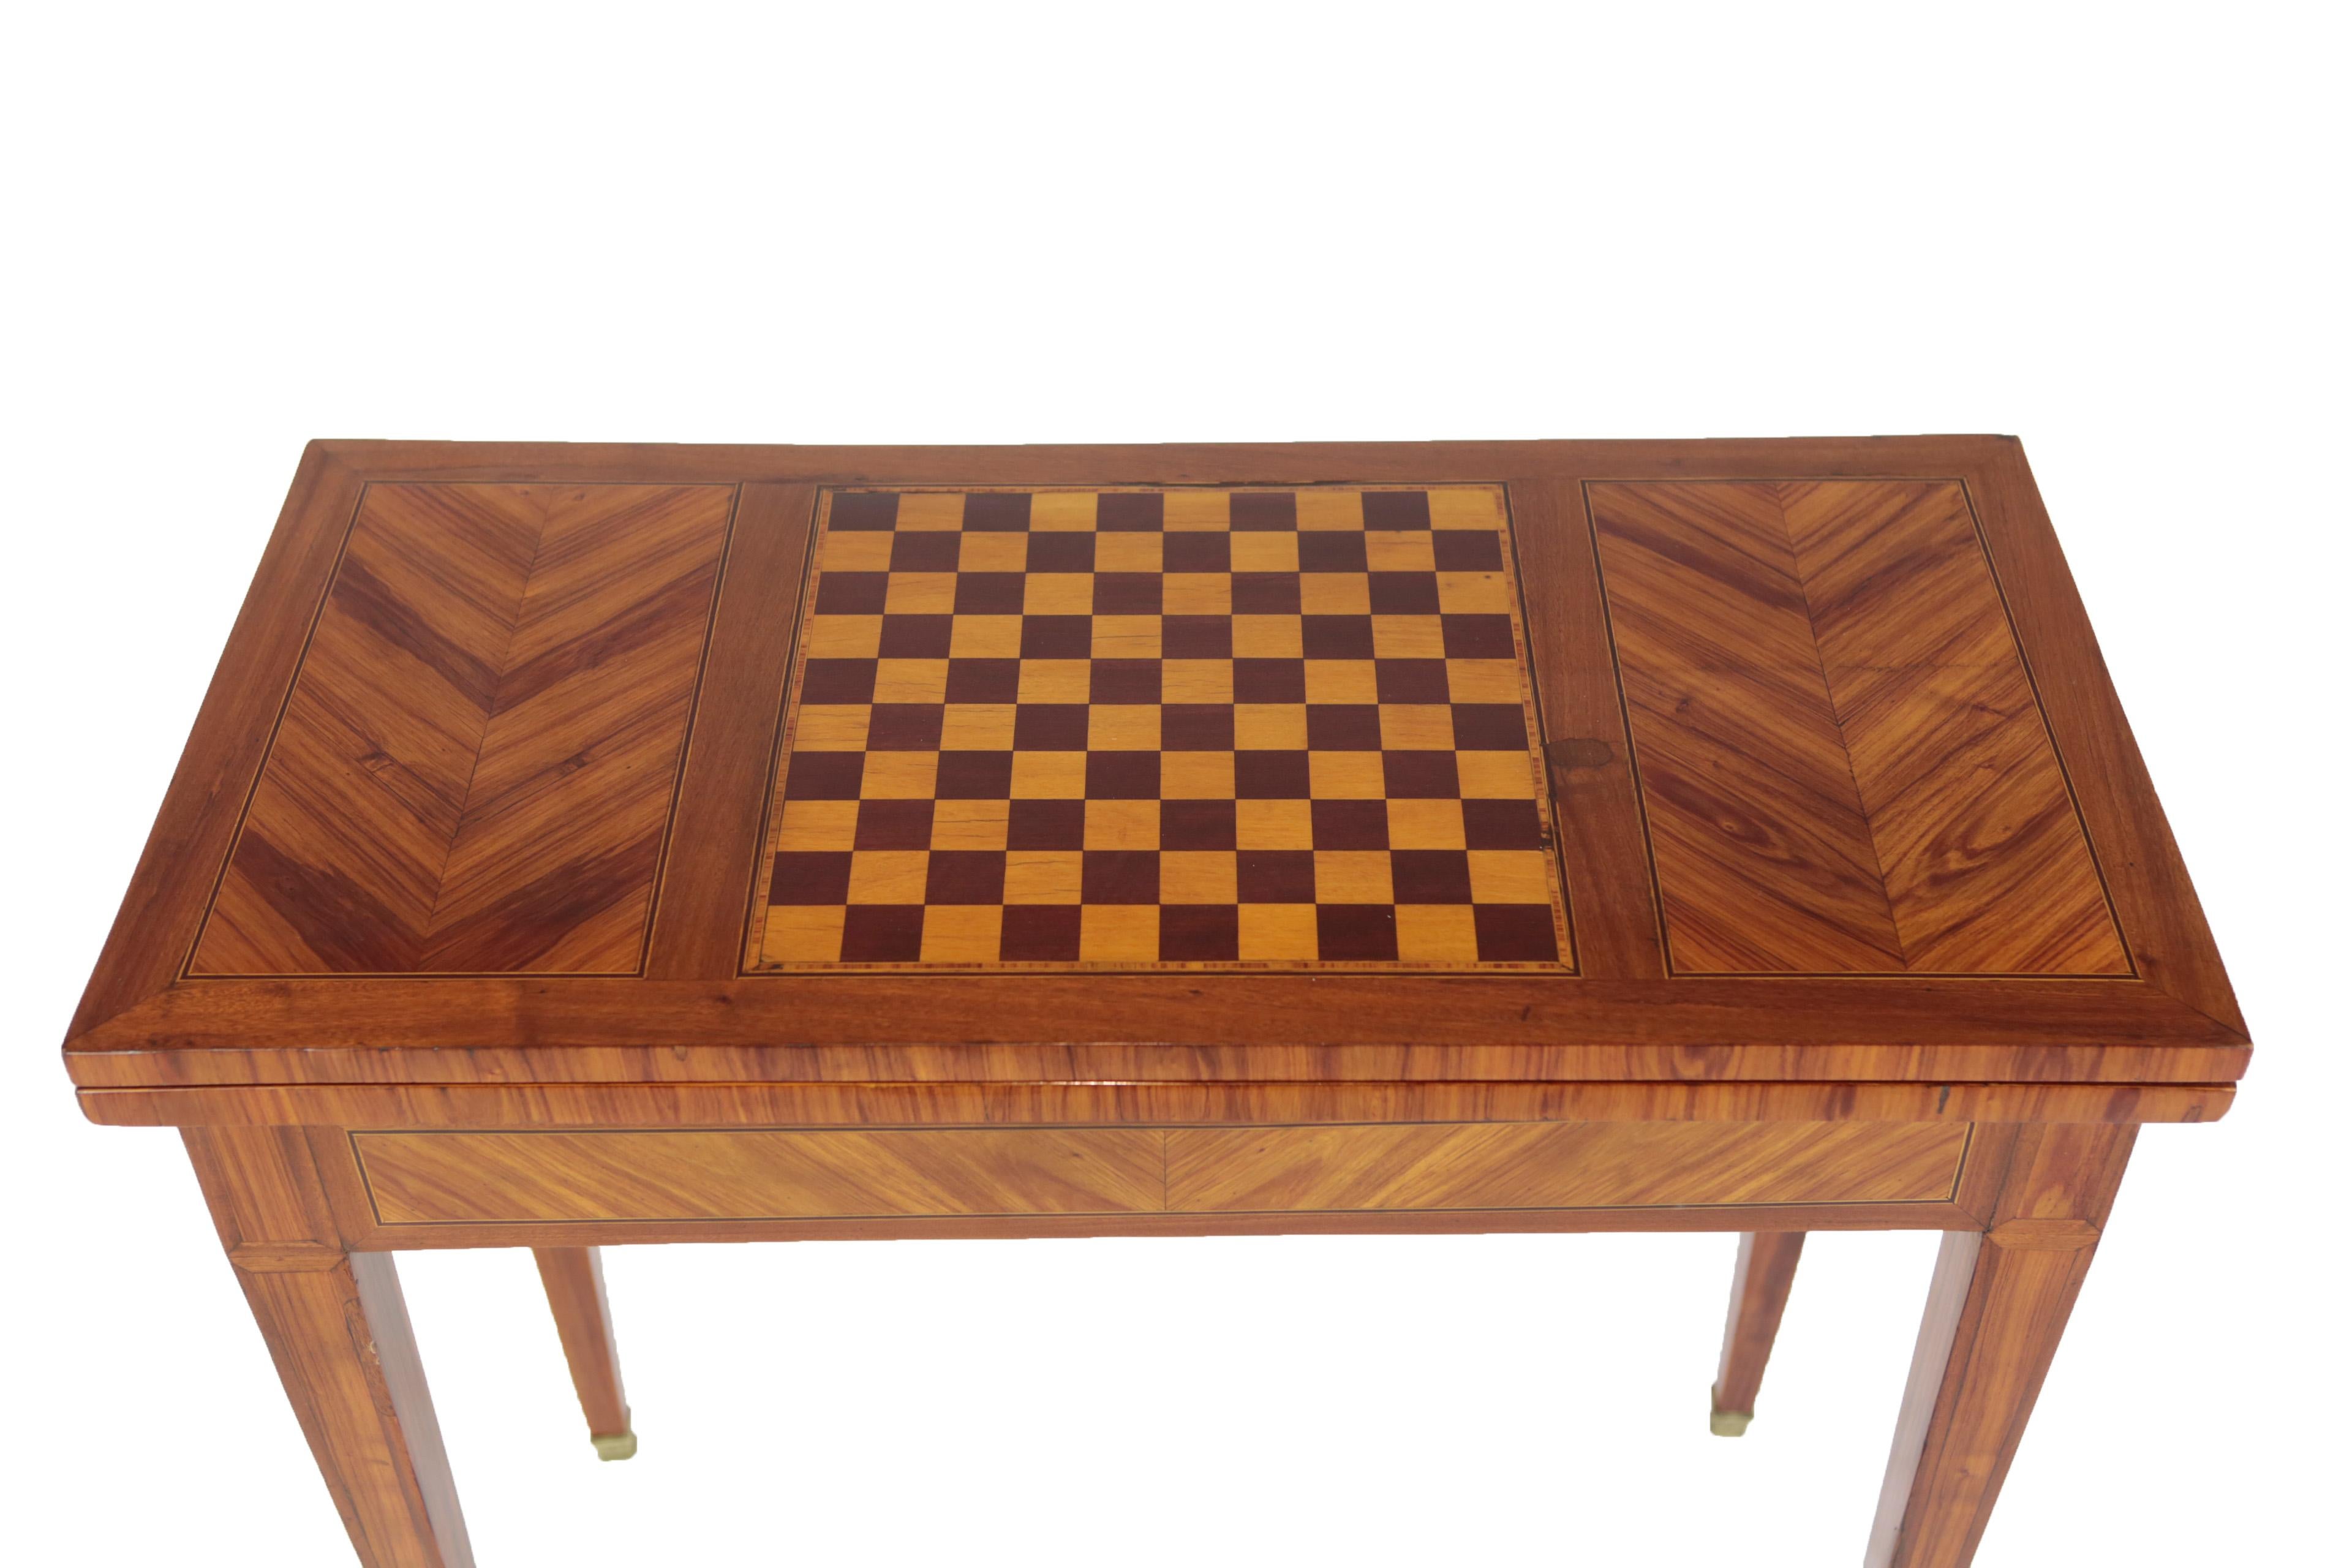 French Foldable Game Table, France, Rosewood, circa 1850-1860